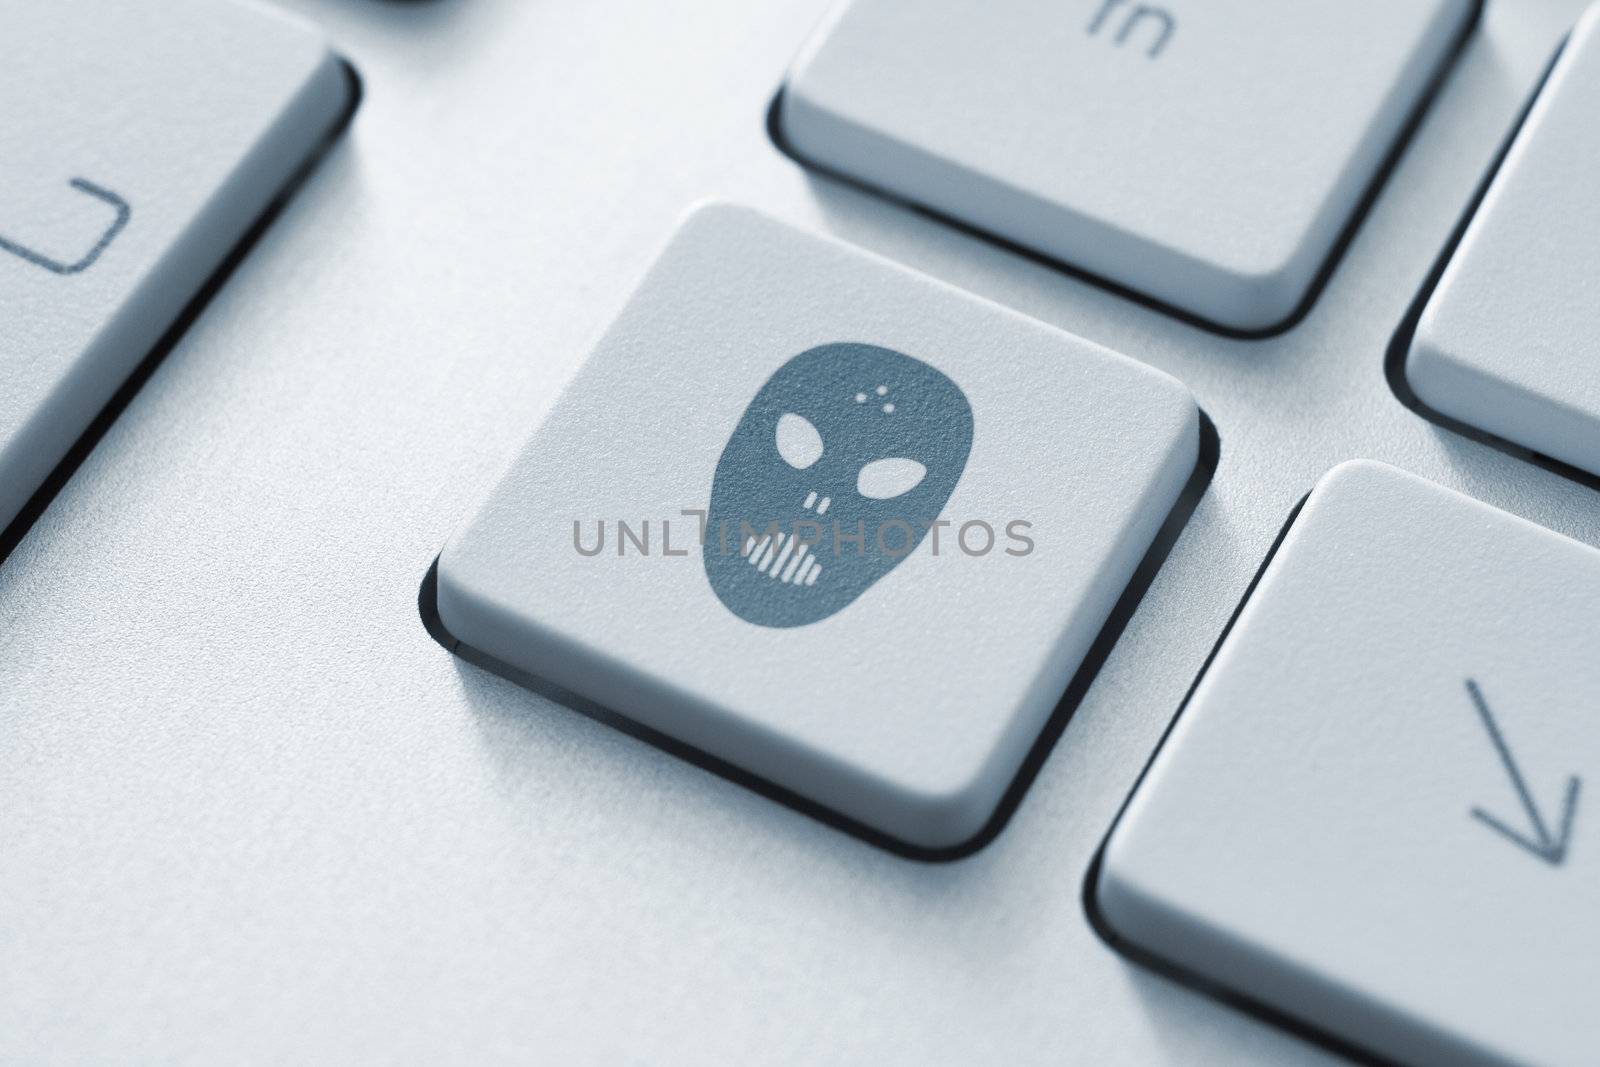 Raiders attack button on the keyboard. Toned Image.